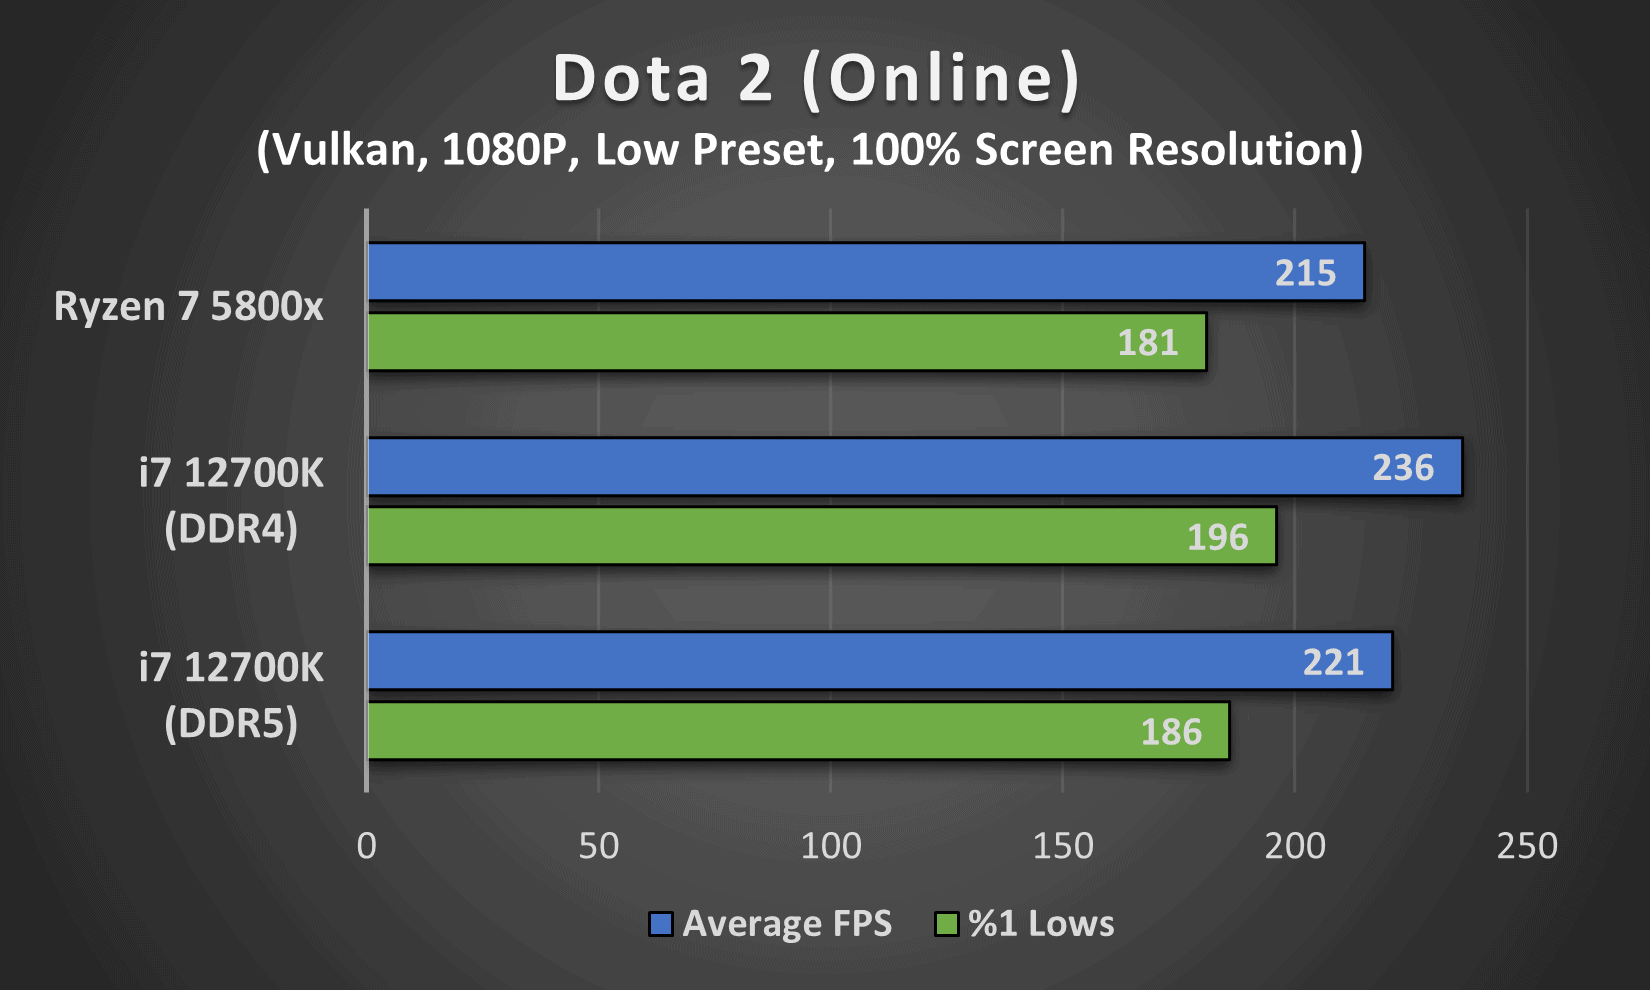 Dota 2 performance comparison between Intel's i7 12700K (DDR4 and DDR5) and AMD's Ryzen 7 5800x